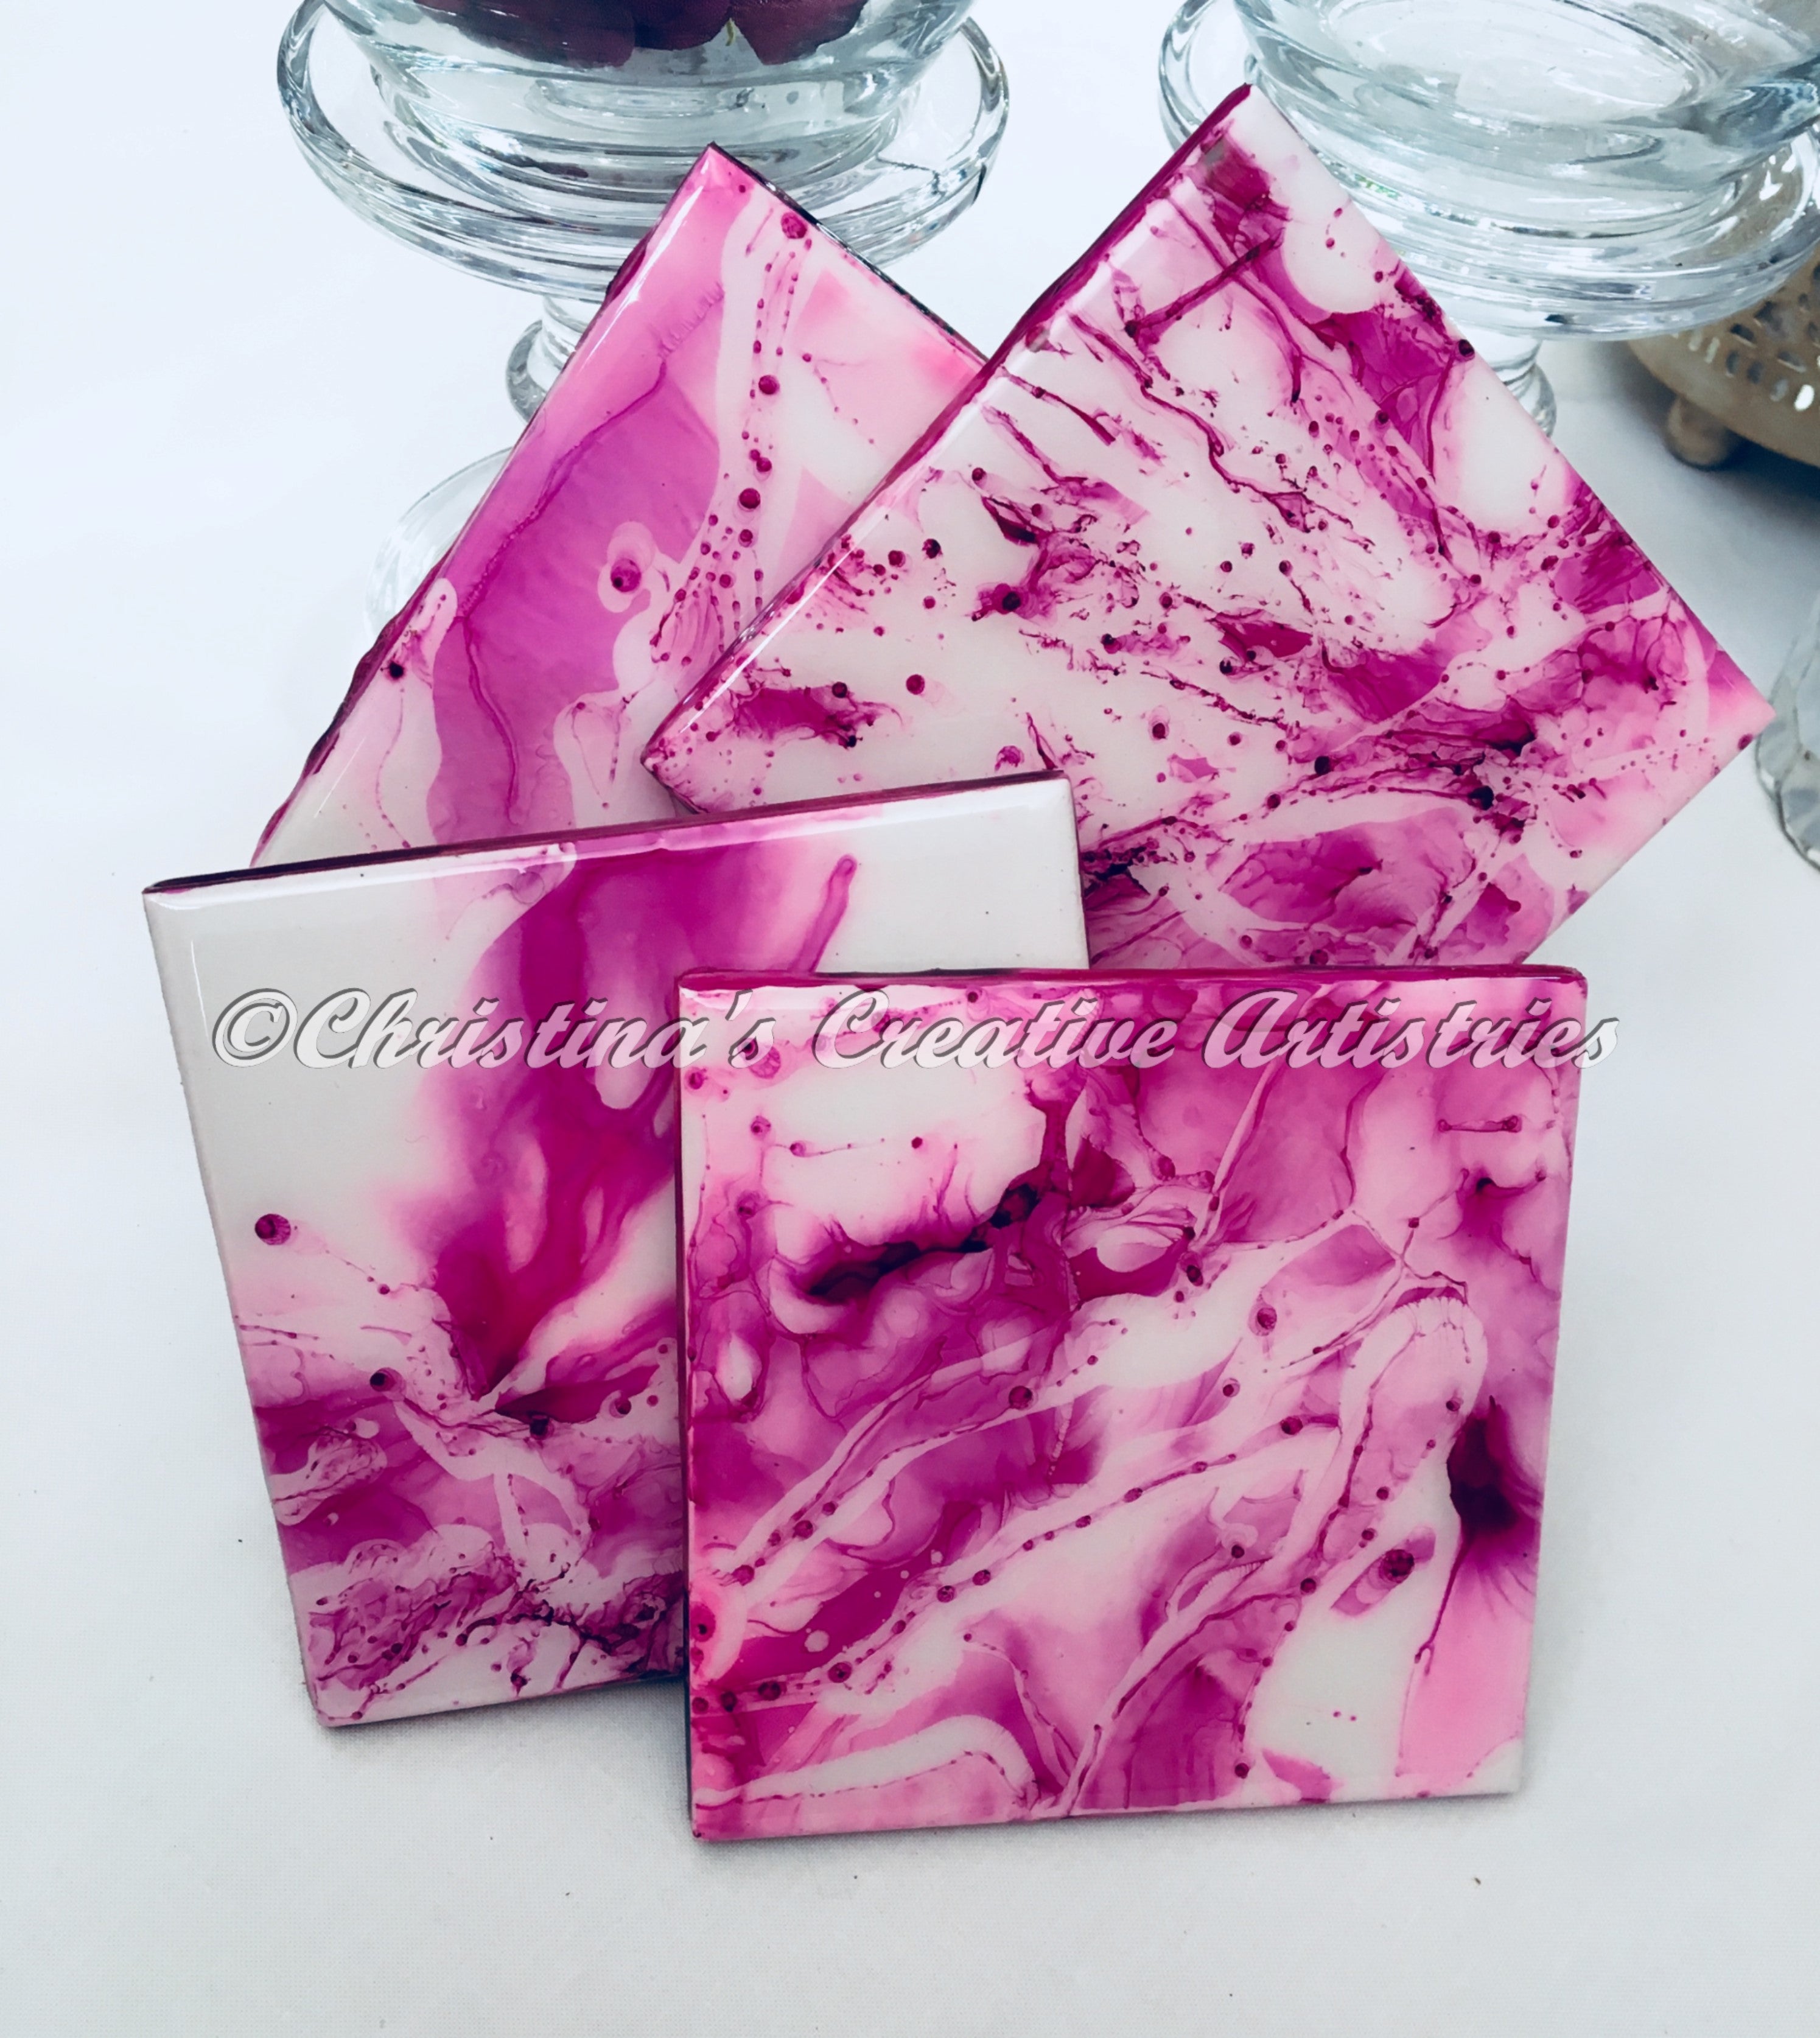 Copy Of Raspberry Squirt product image.  Features 4 inch by 4 inch ceramic coasters.  Set of 4.  Color is fuchsia on white background.  Cork backed. Durable coating.  1 acrylic coaster stand included.  